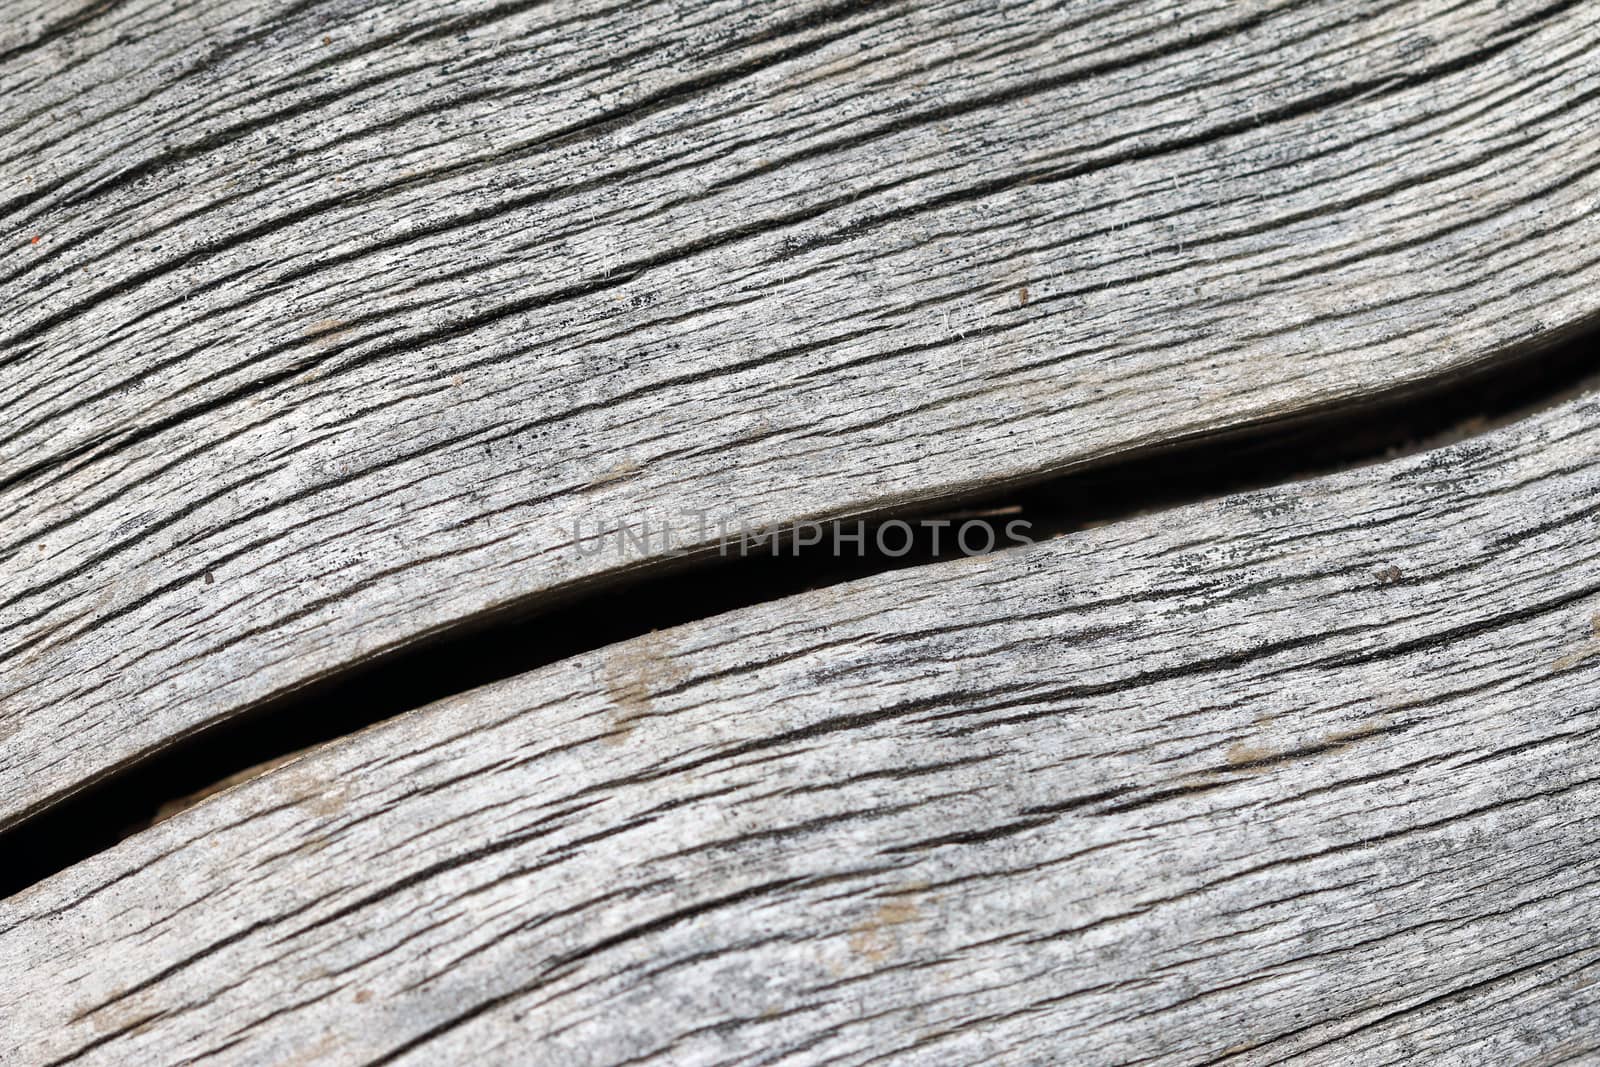 Crack in the wood by Mibuch